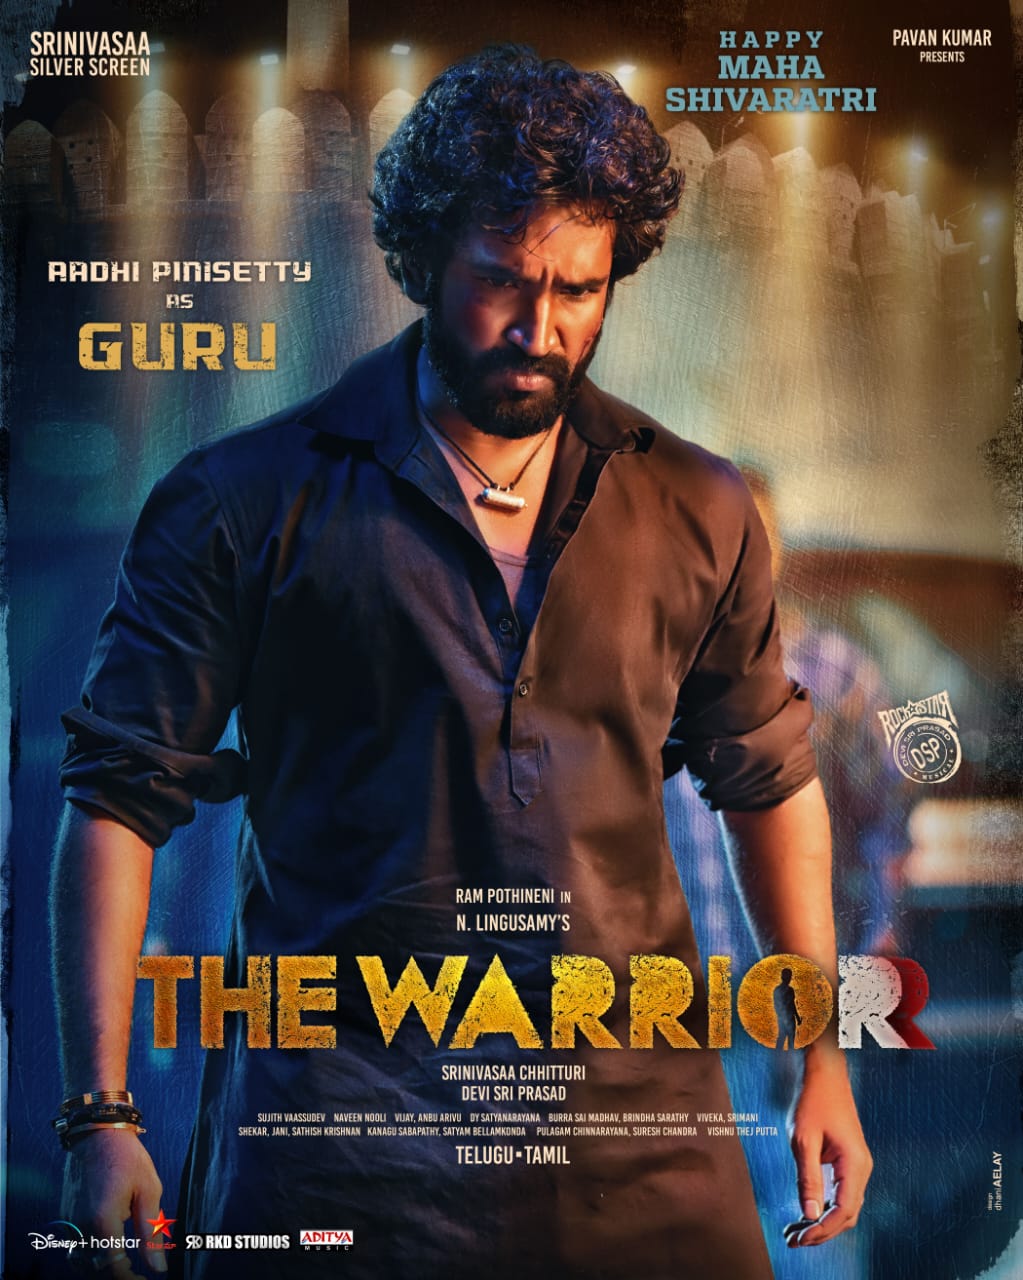 The first look of Aadhi Pinisetty from The Warriorr